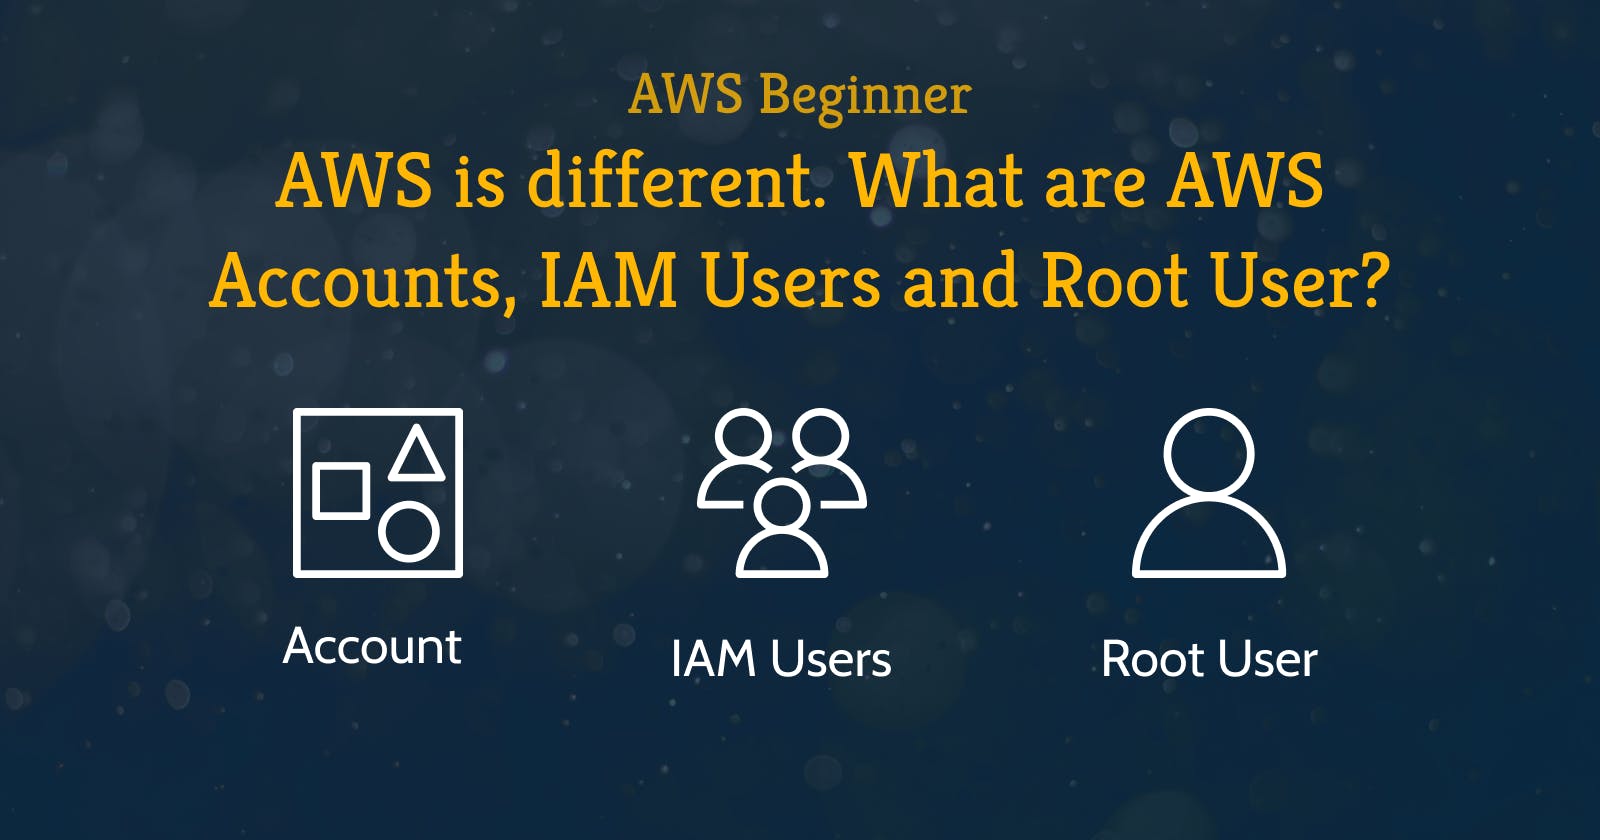 AWS Beginner: AWS is different. What are AWS Accounts, IAM Users and Root User?